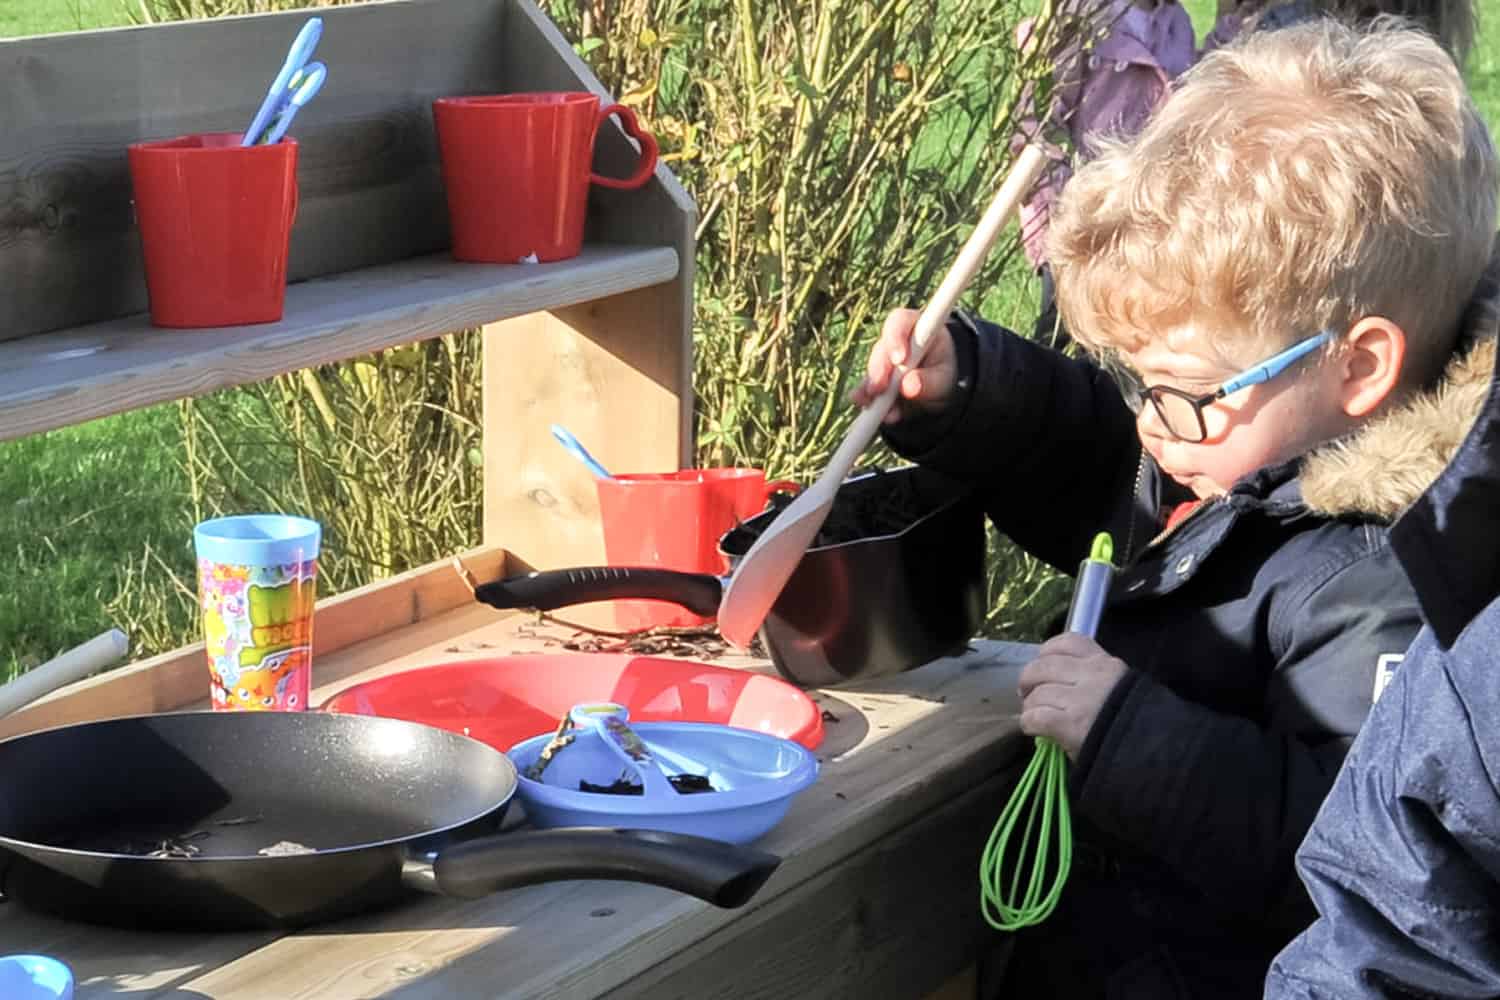 a child holding a green whisk and wooden spoon pretending to cook with a frying pan and saucepan on a wooden mud pie kitchen